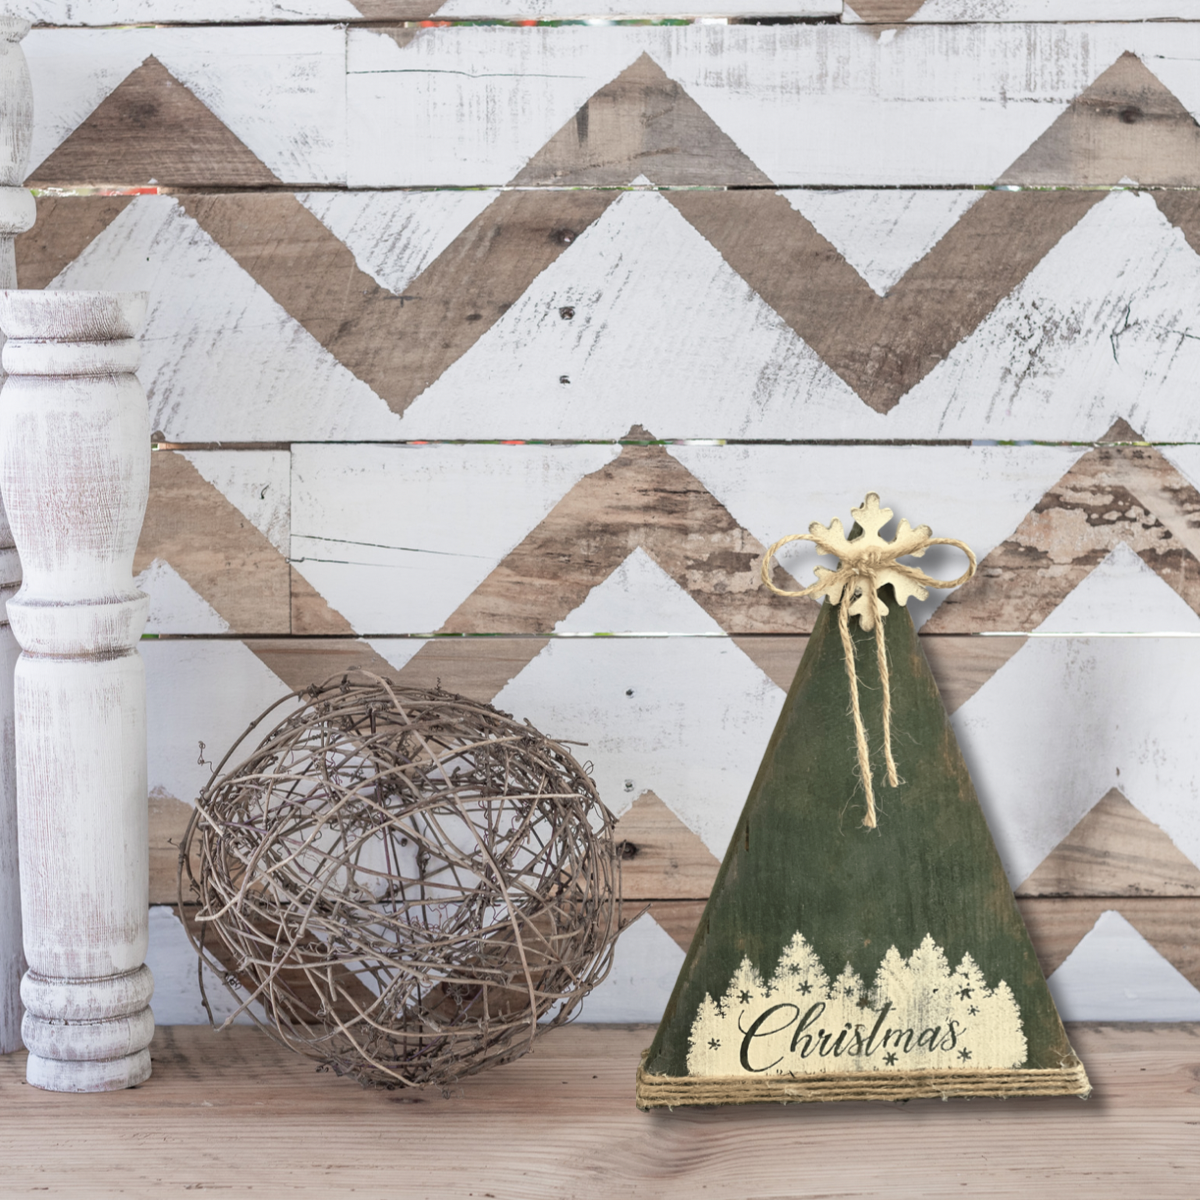 Rustic Wooden "Christmas" Tree